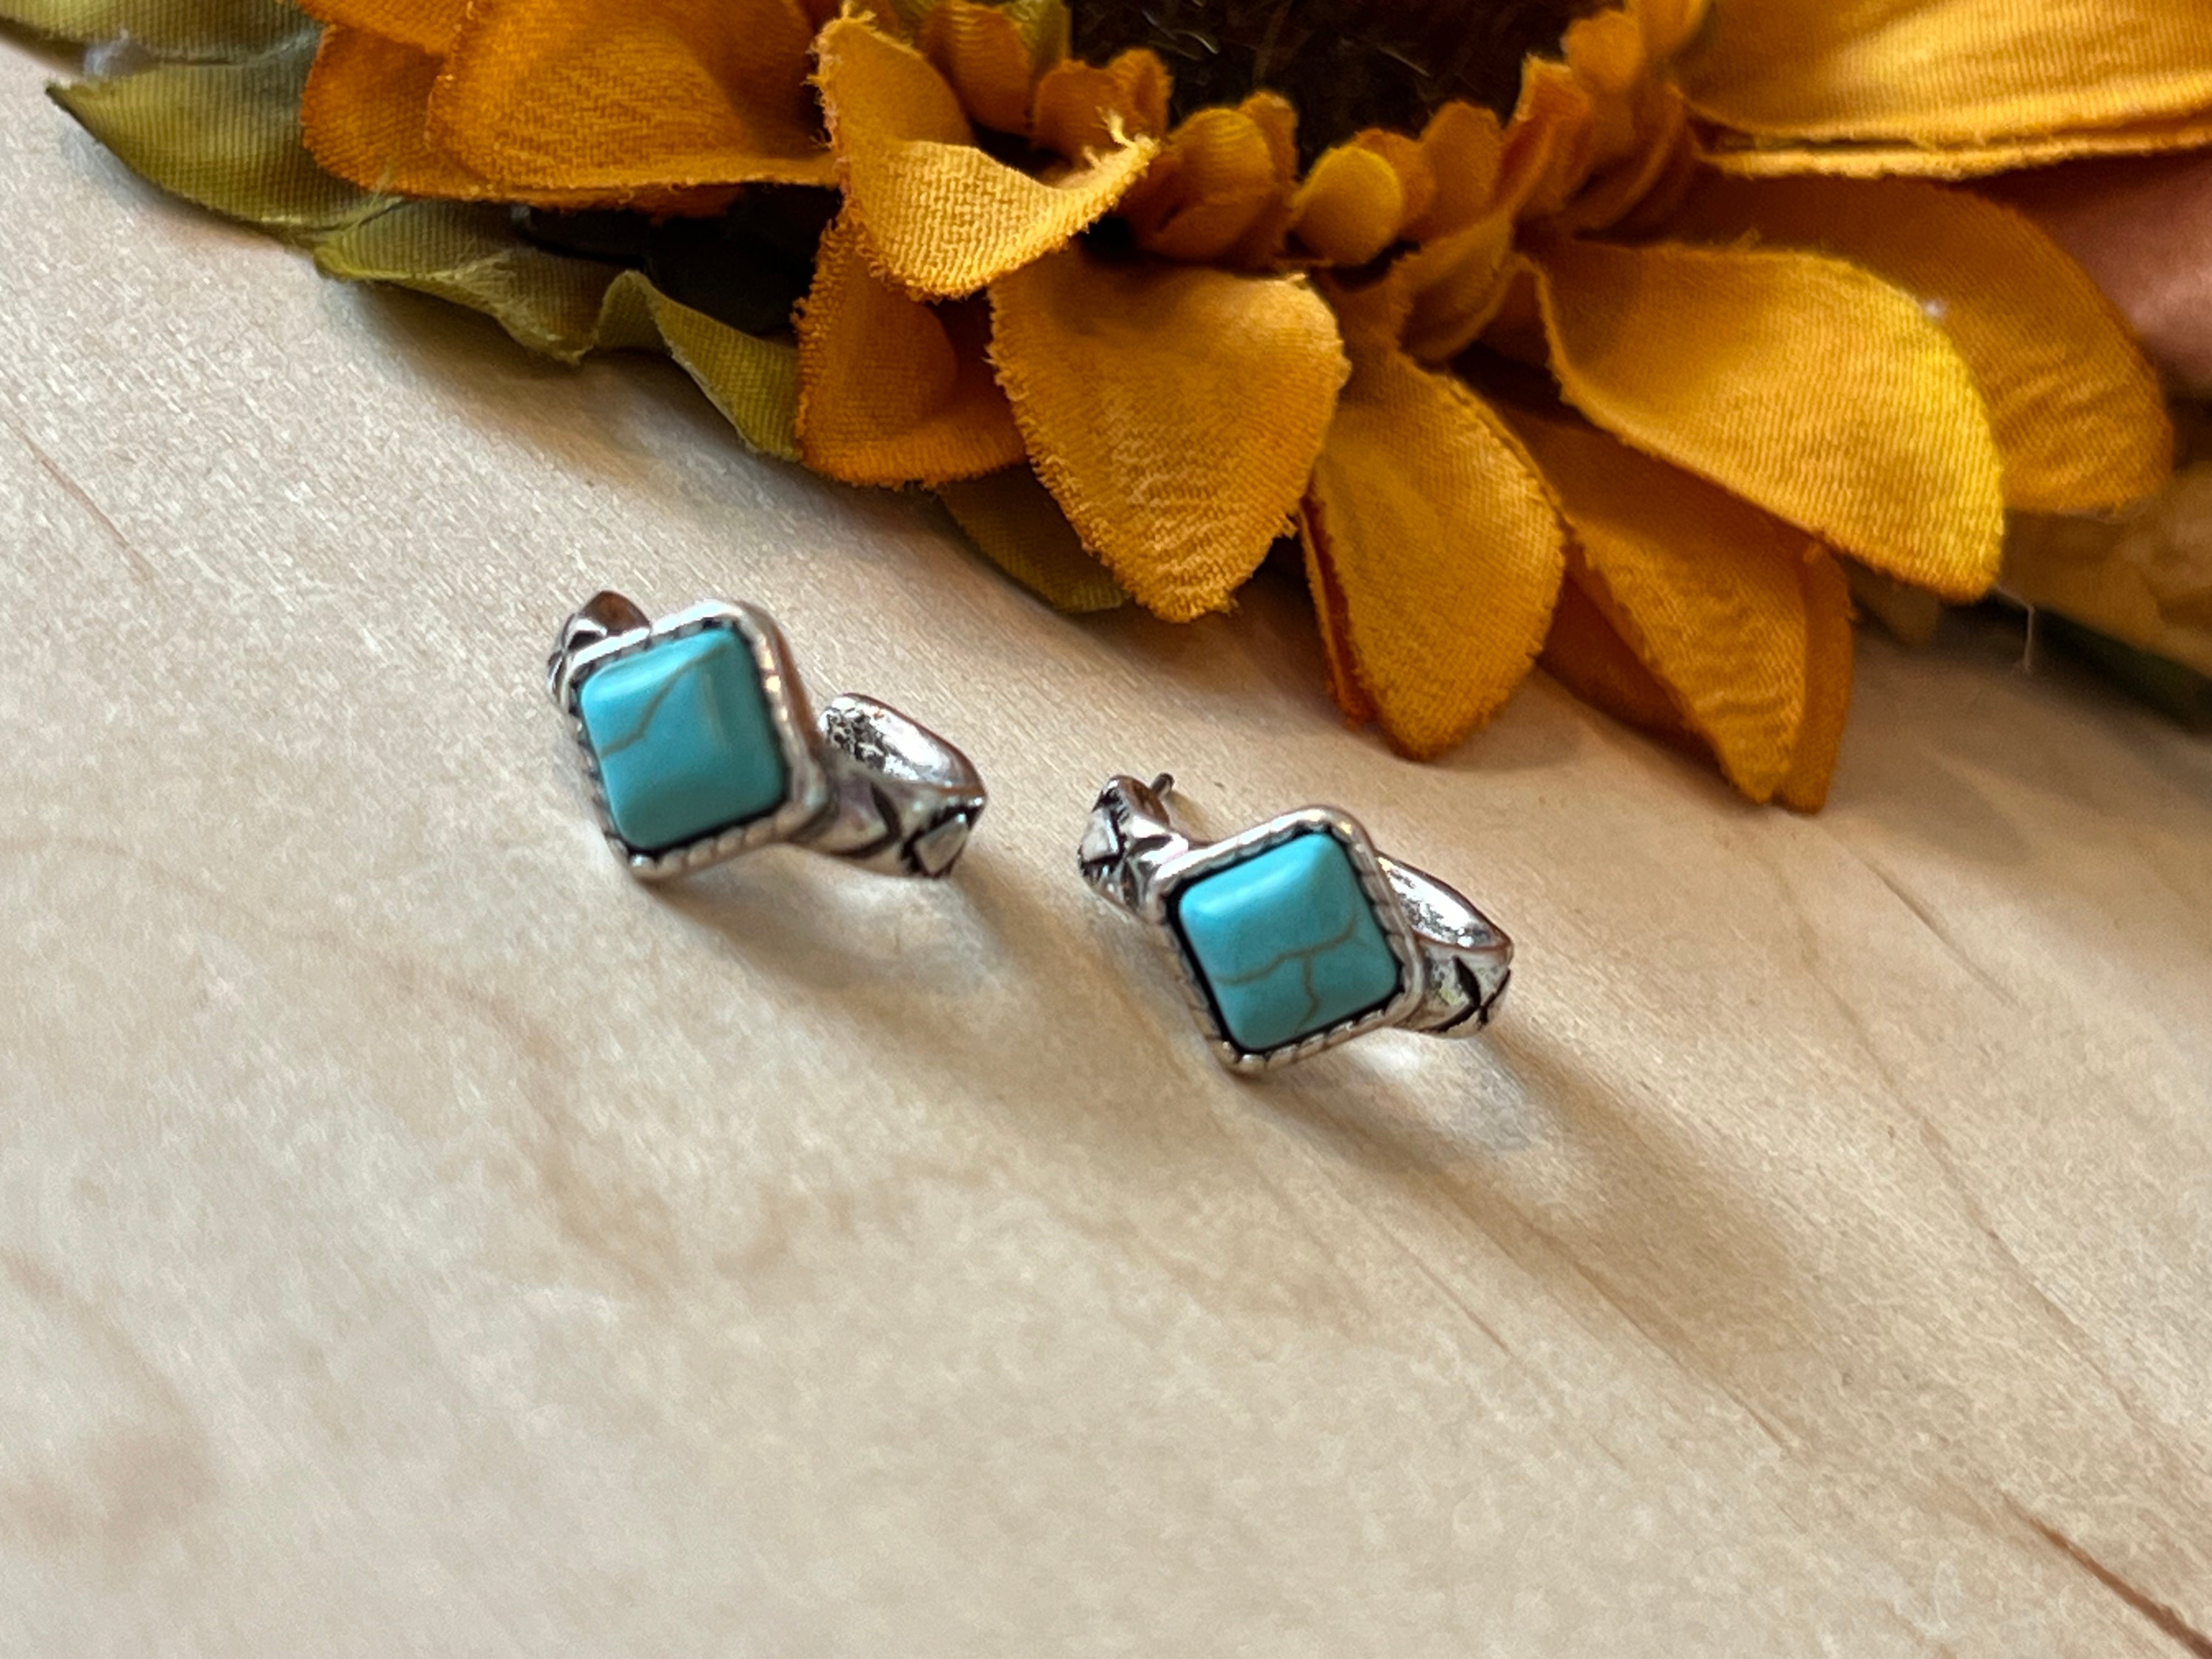 Tiny Square Hoops Earrings